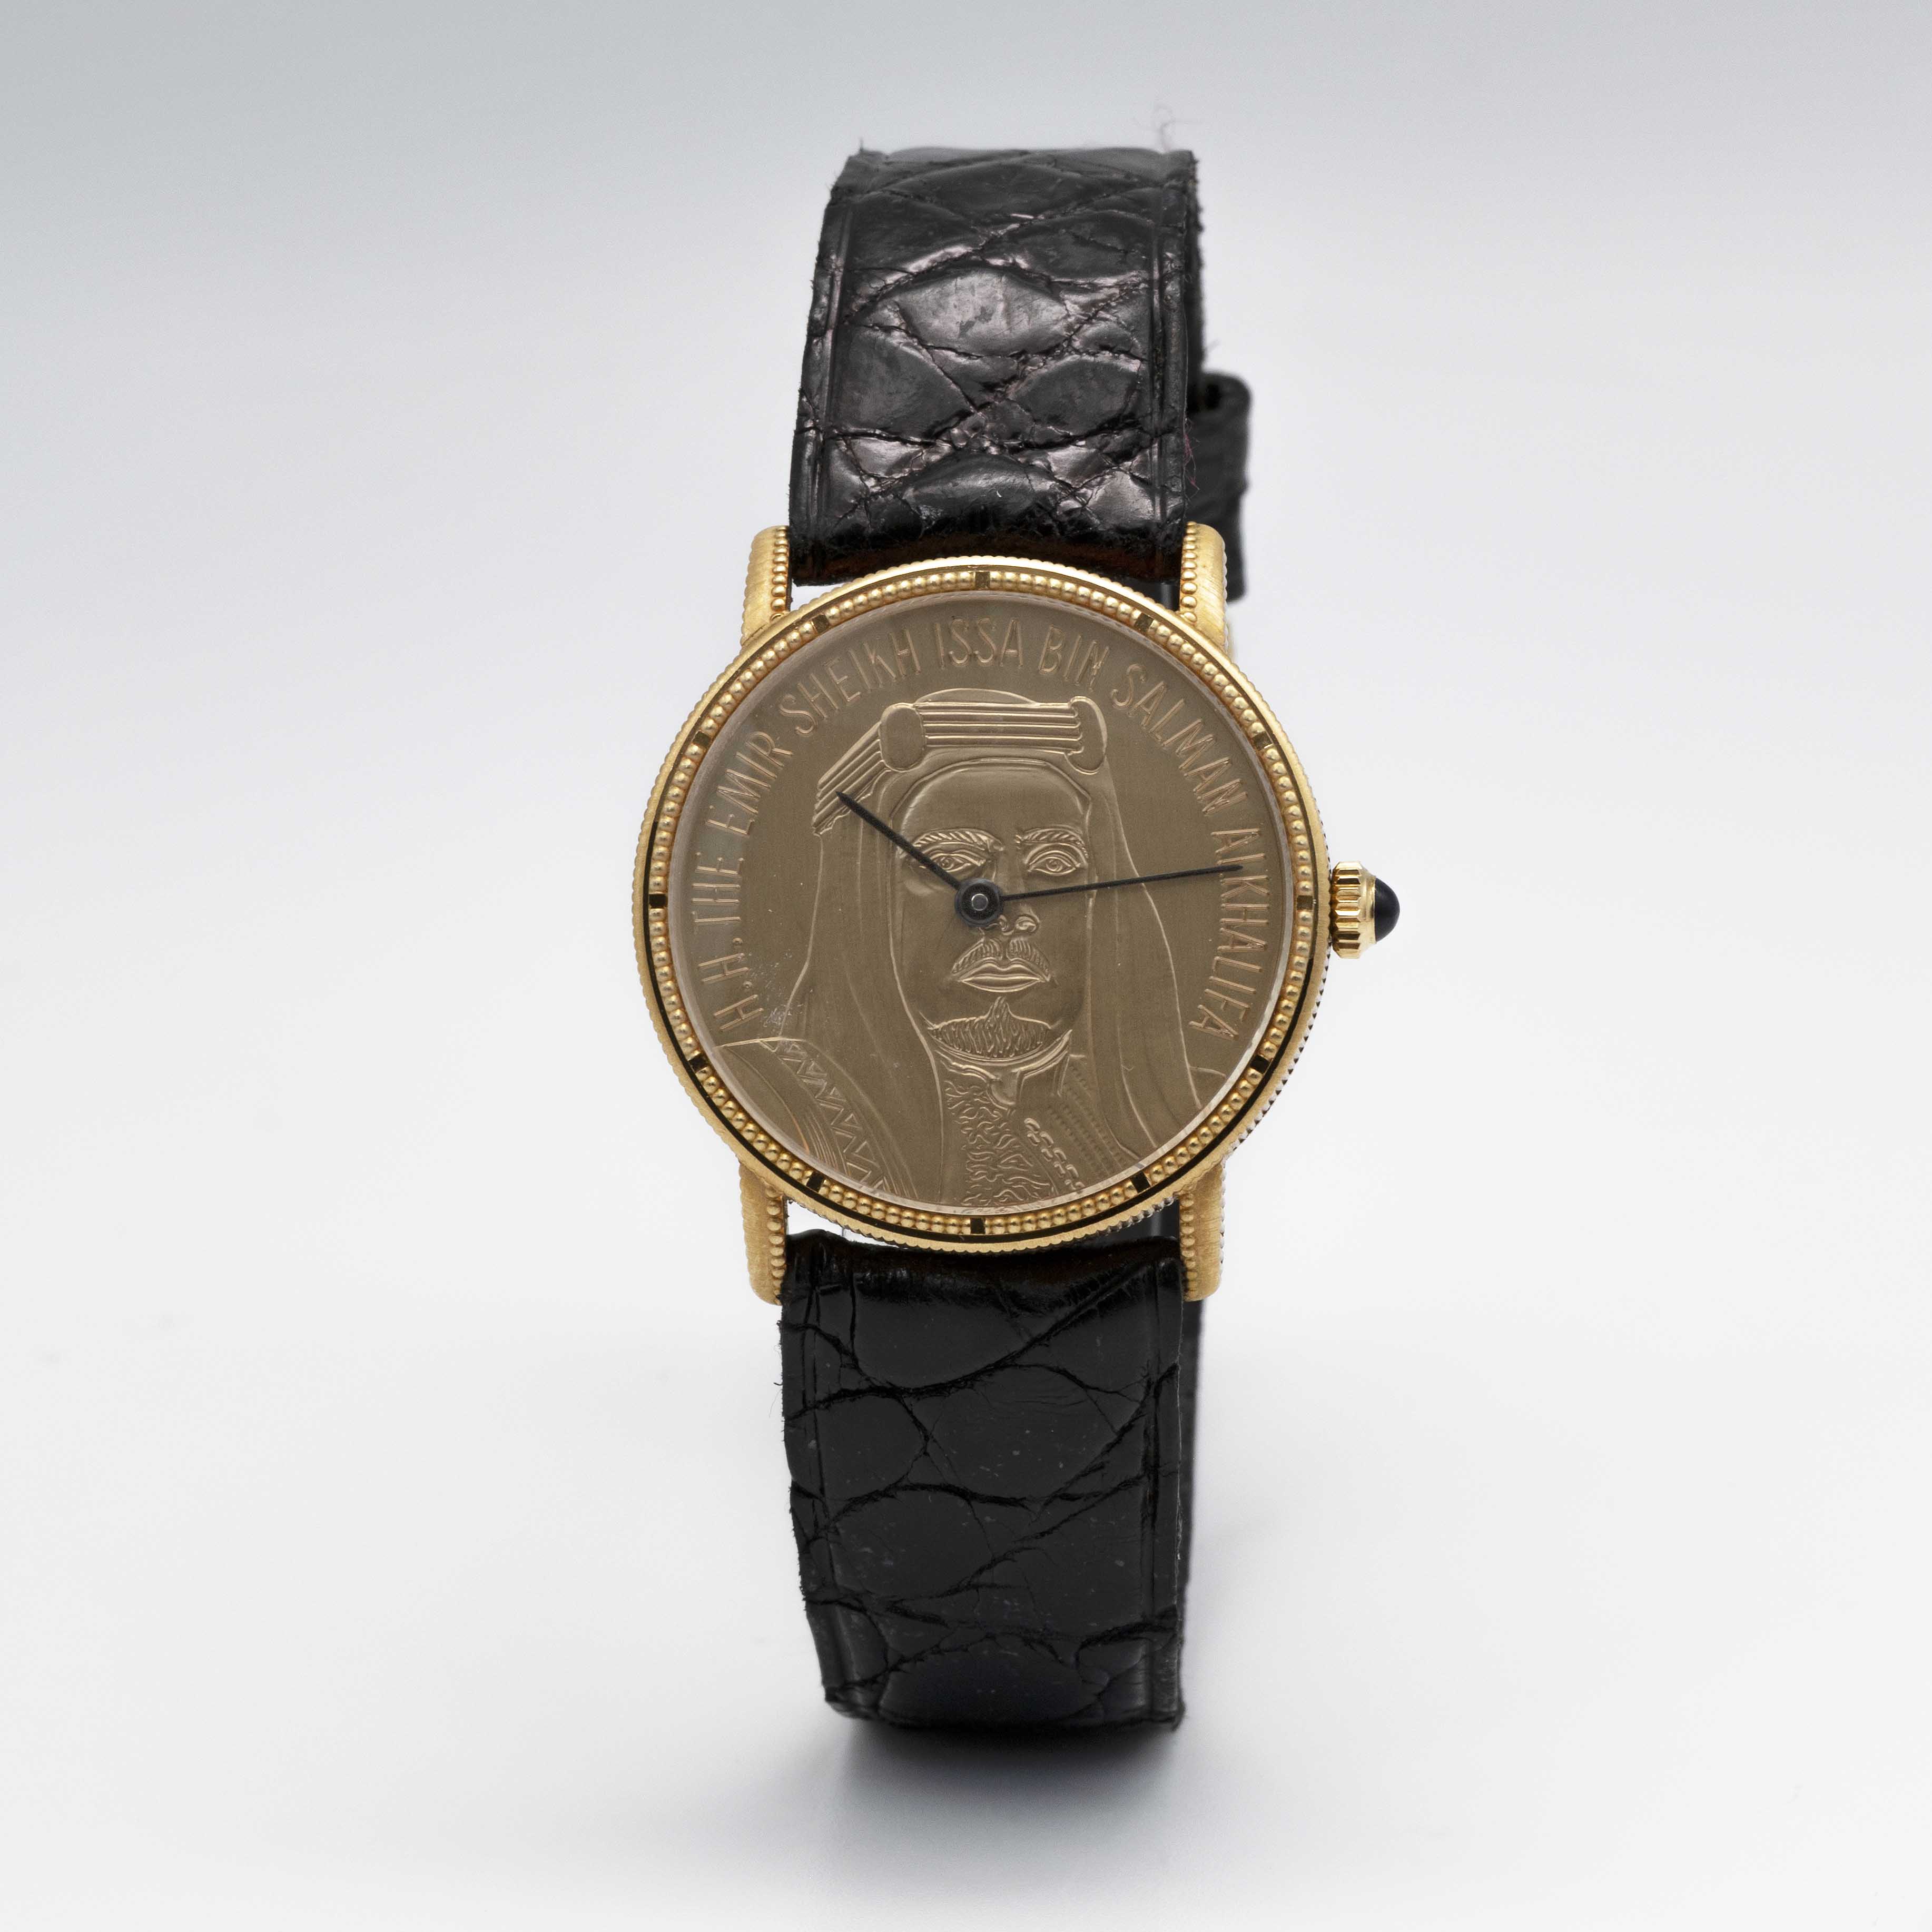 A GENTLEMAN'S 18K SOLID GOLD BAUME & MERCIER WRIST WATCH CIRCA 1980s,  REF. 35102 COMMISSIONED BY - Image 2 of 9